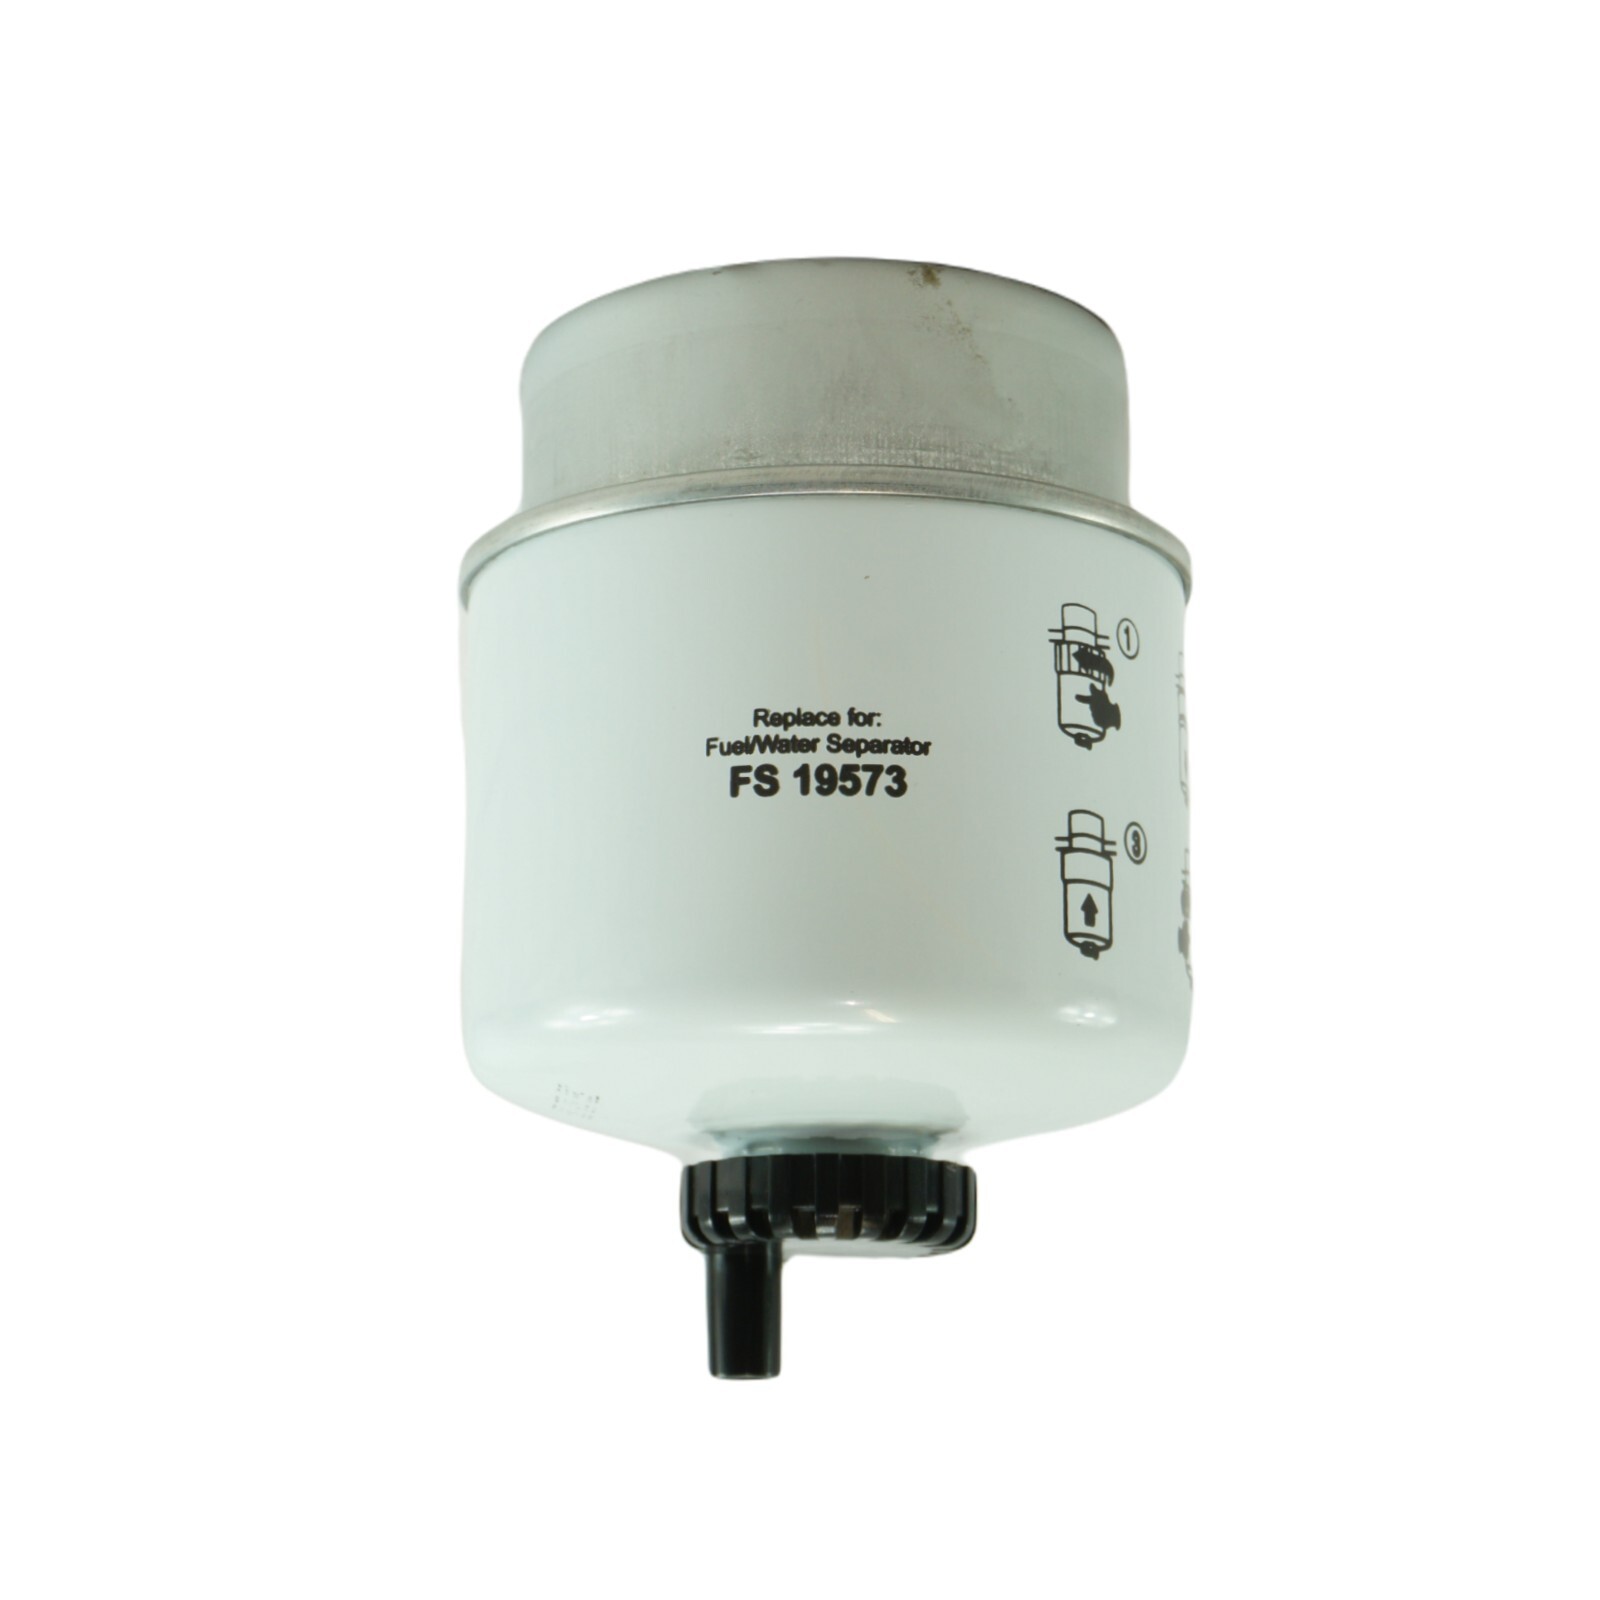 SFC-7602 Sakura Fuel Water Separator Filter - Fits Fuel Manager + More Xref: RE60021, 31871, FS19573